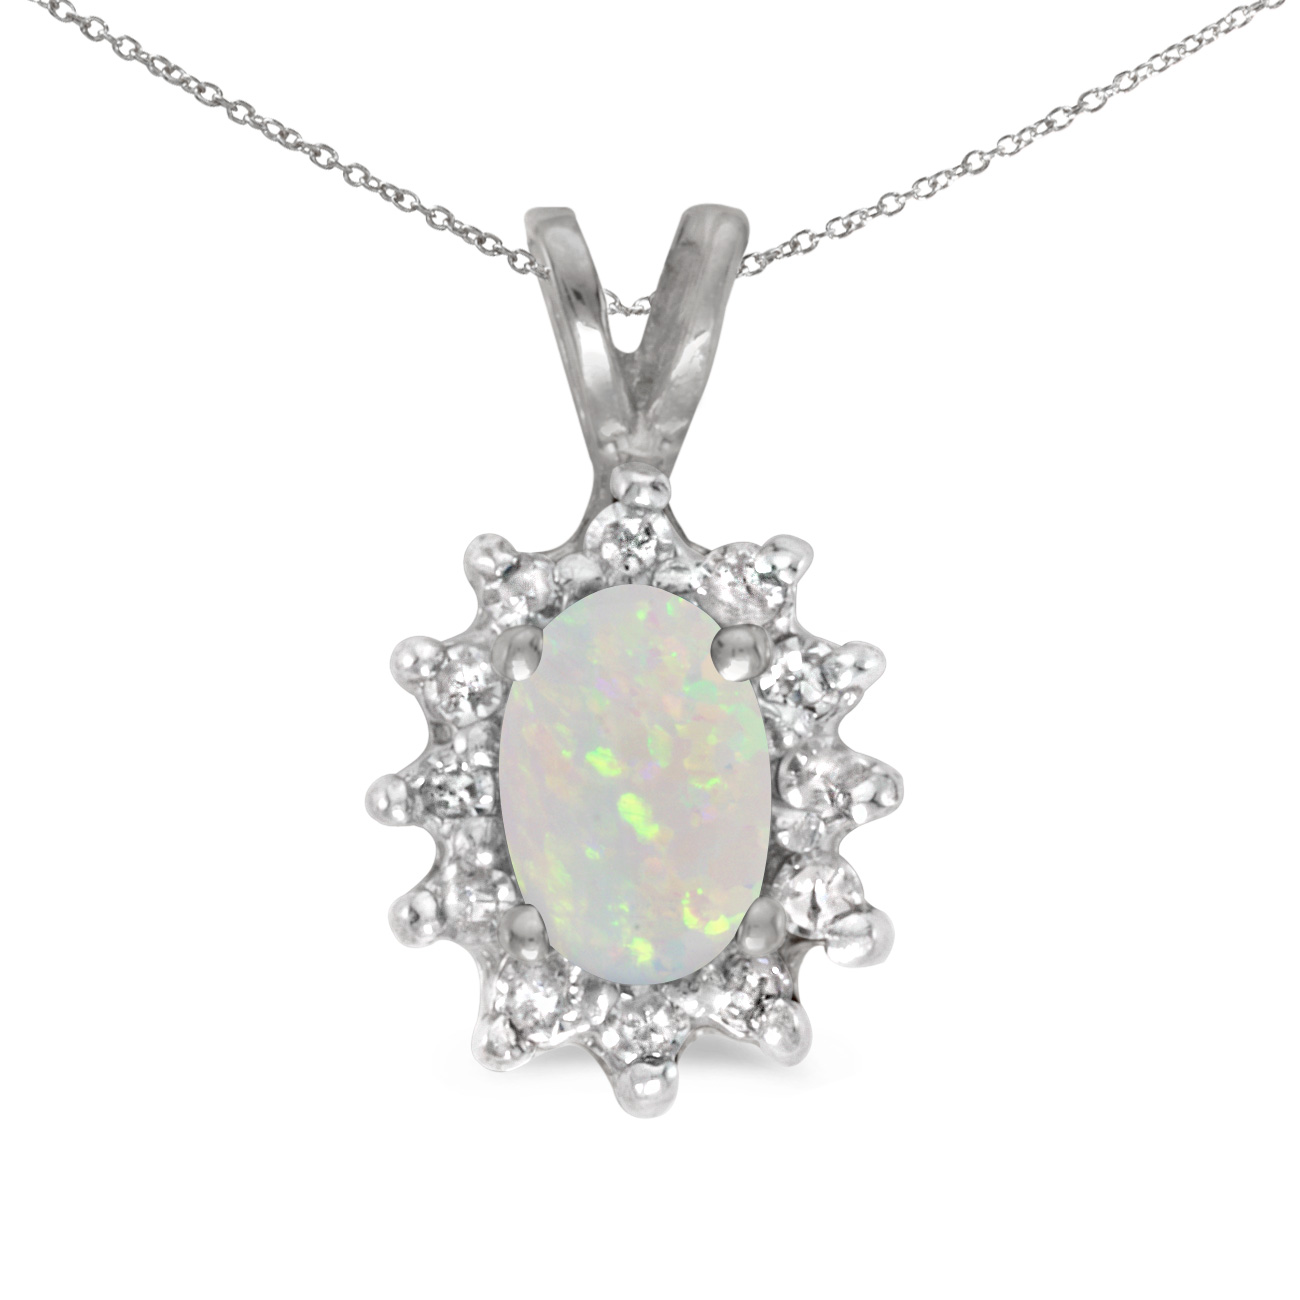 JCX2751: This 14k white gold oval opal and diamond pendant features a 6x4 mm genuine natural opal with a 0.19 ct total weight.